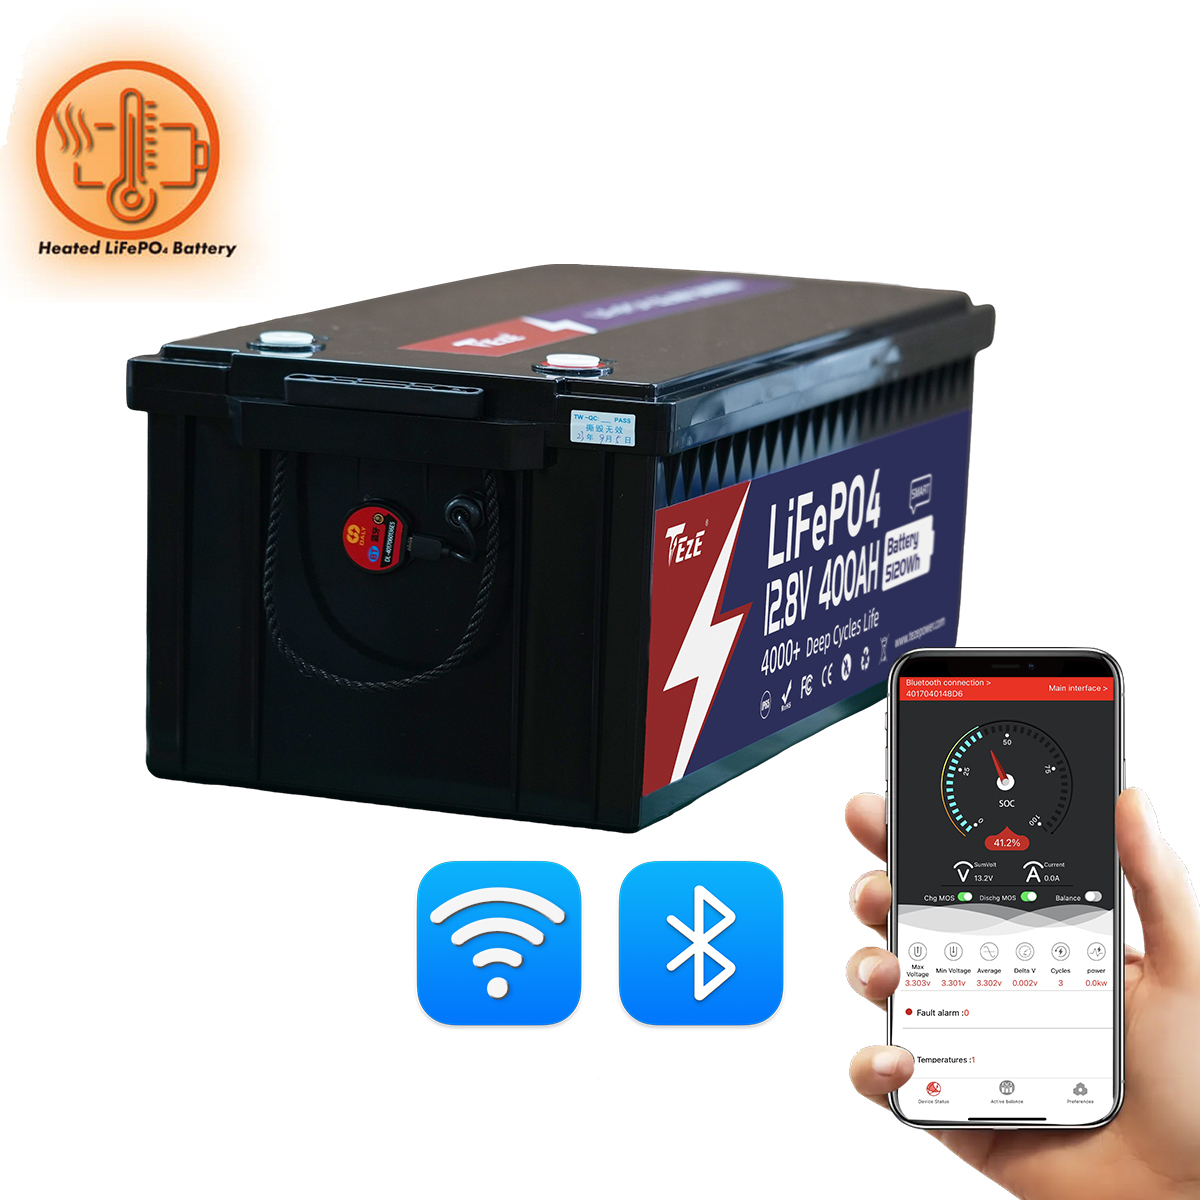 New Add WiFi-TezePower 12V 400Ah LiFePO4 Battery with WIFI and Bluetooth, Self-heating and Active Balancer, Built-in 250A Daly BMS(WIFI External Version)